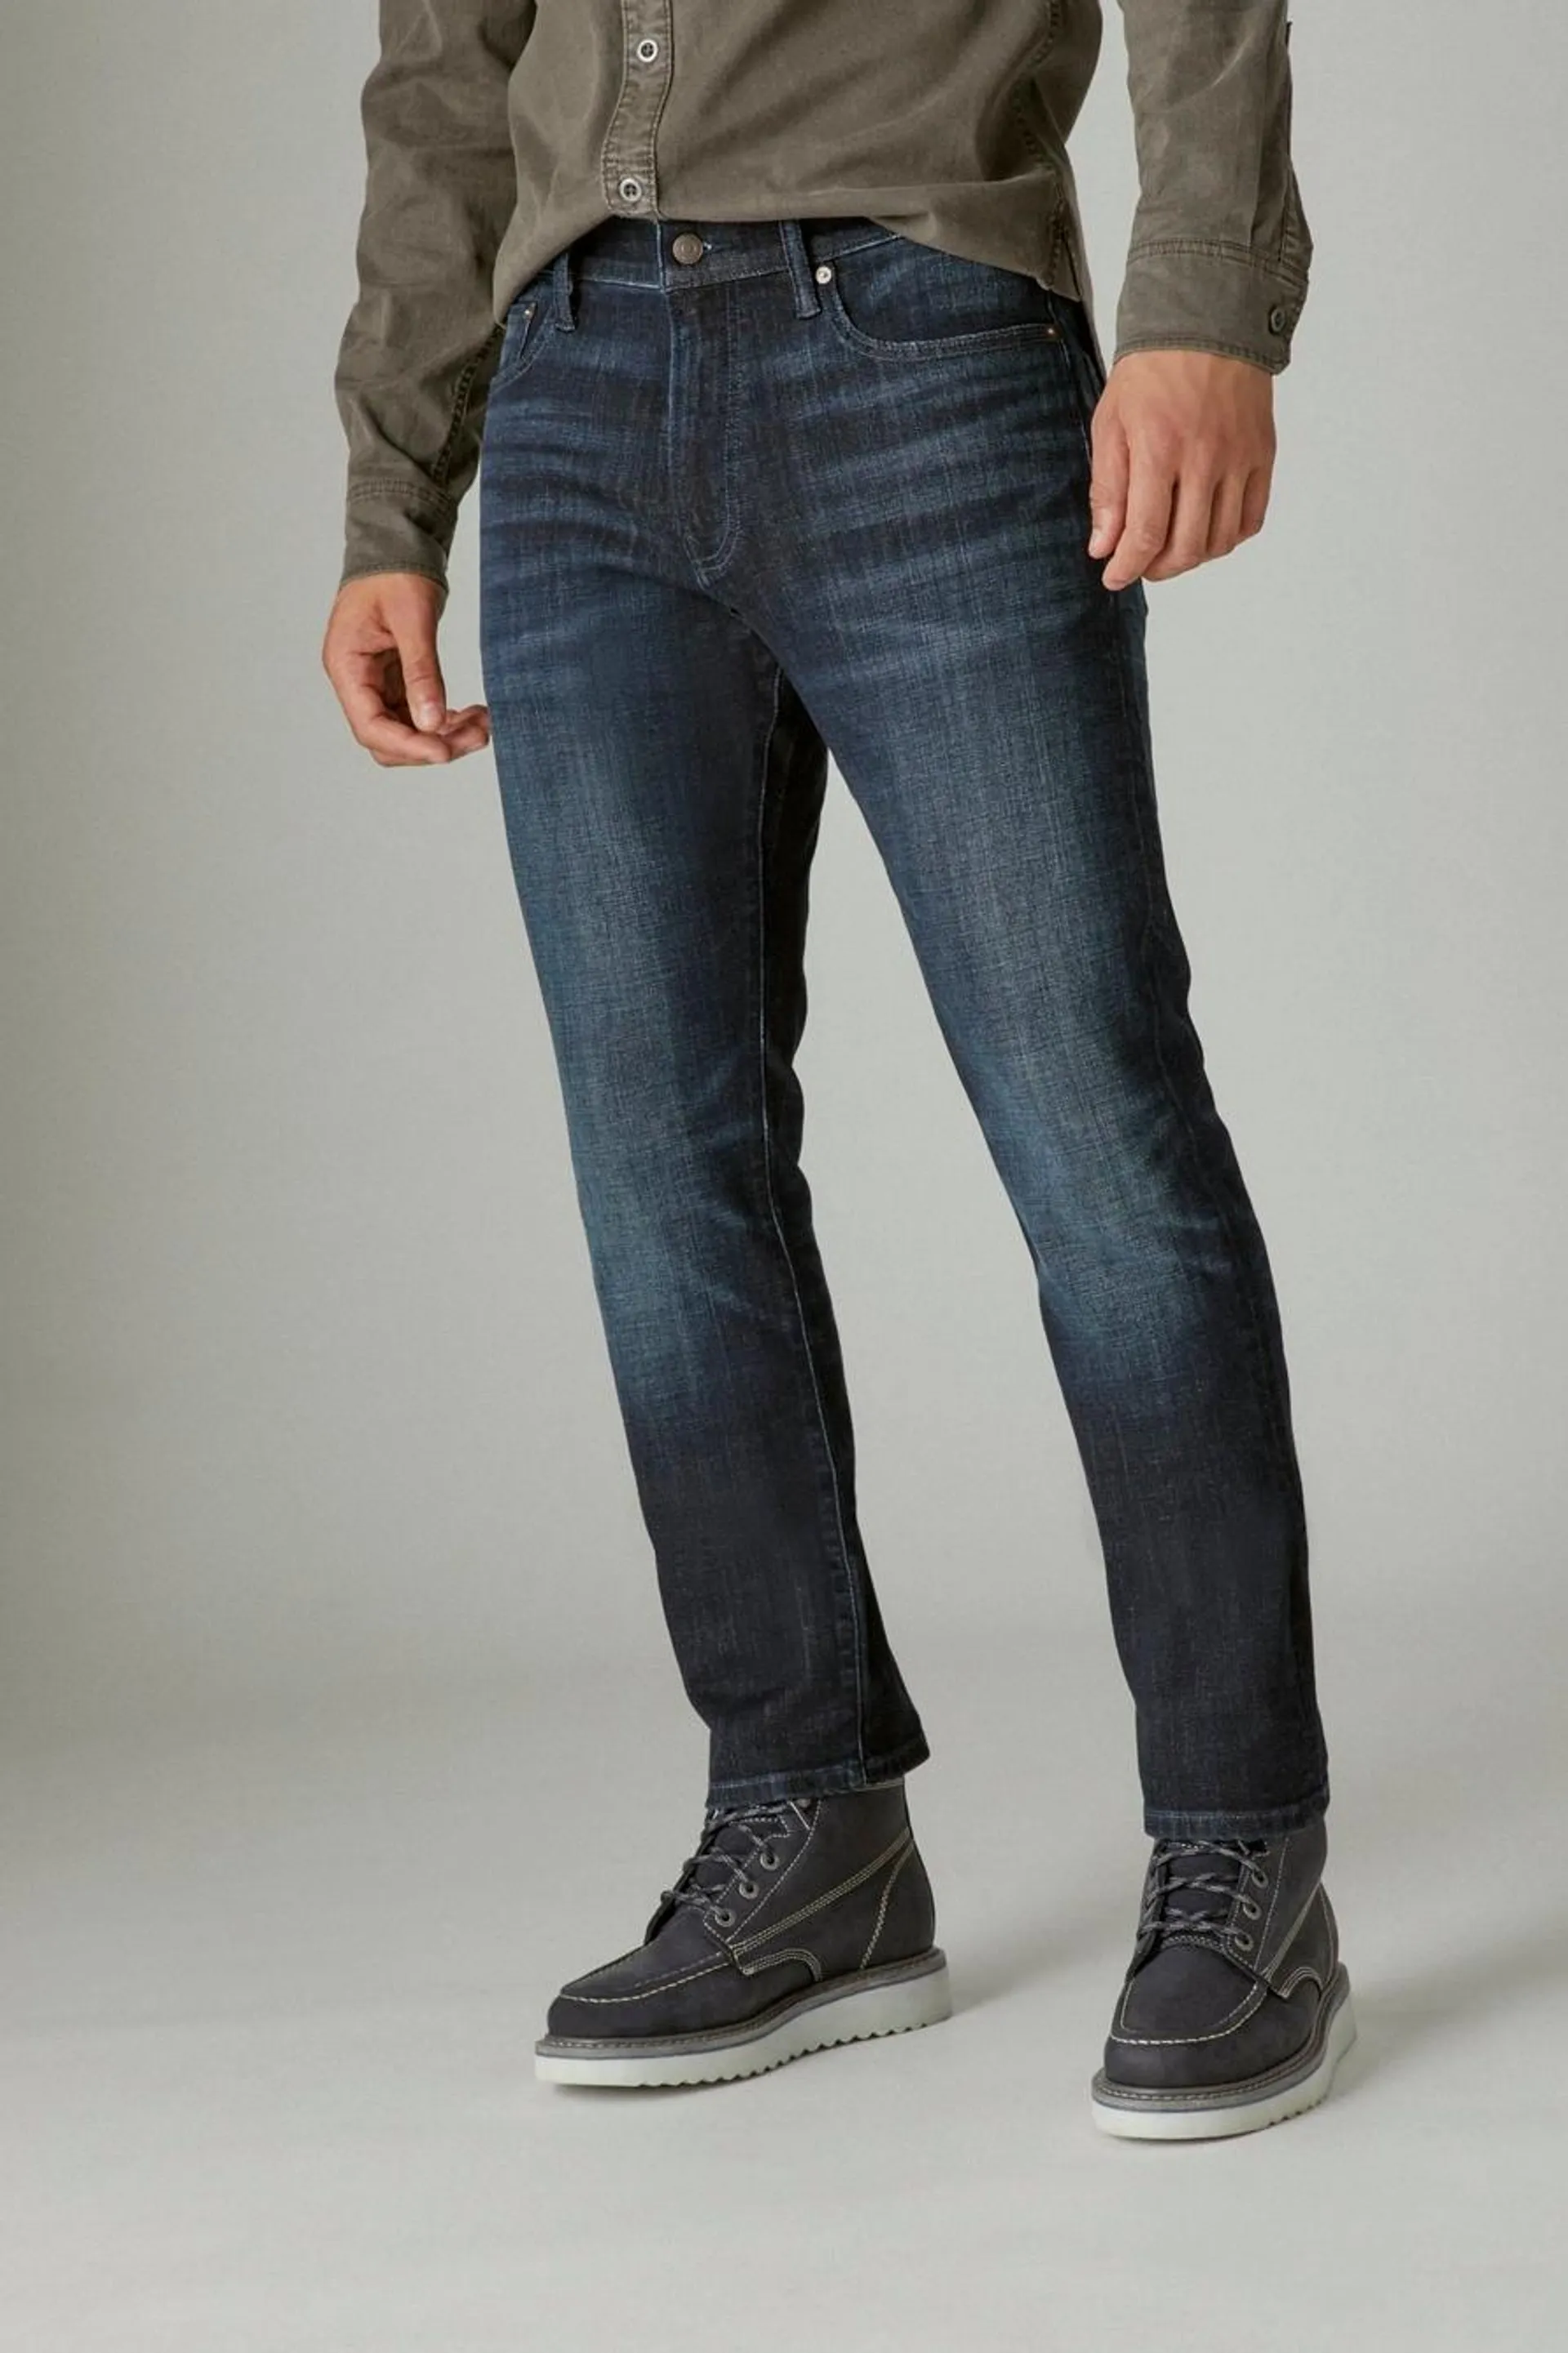 410 athletic straight coolmax stretch jean